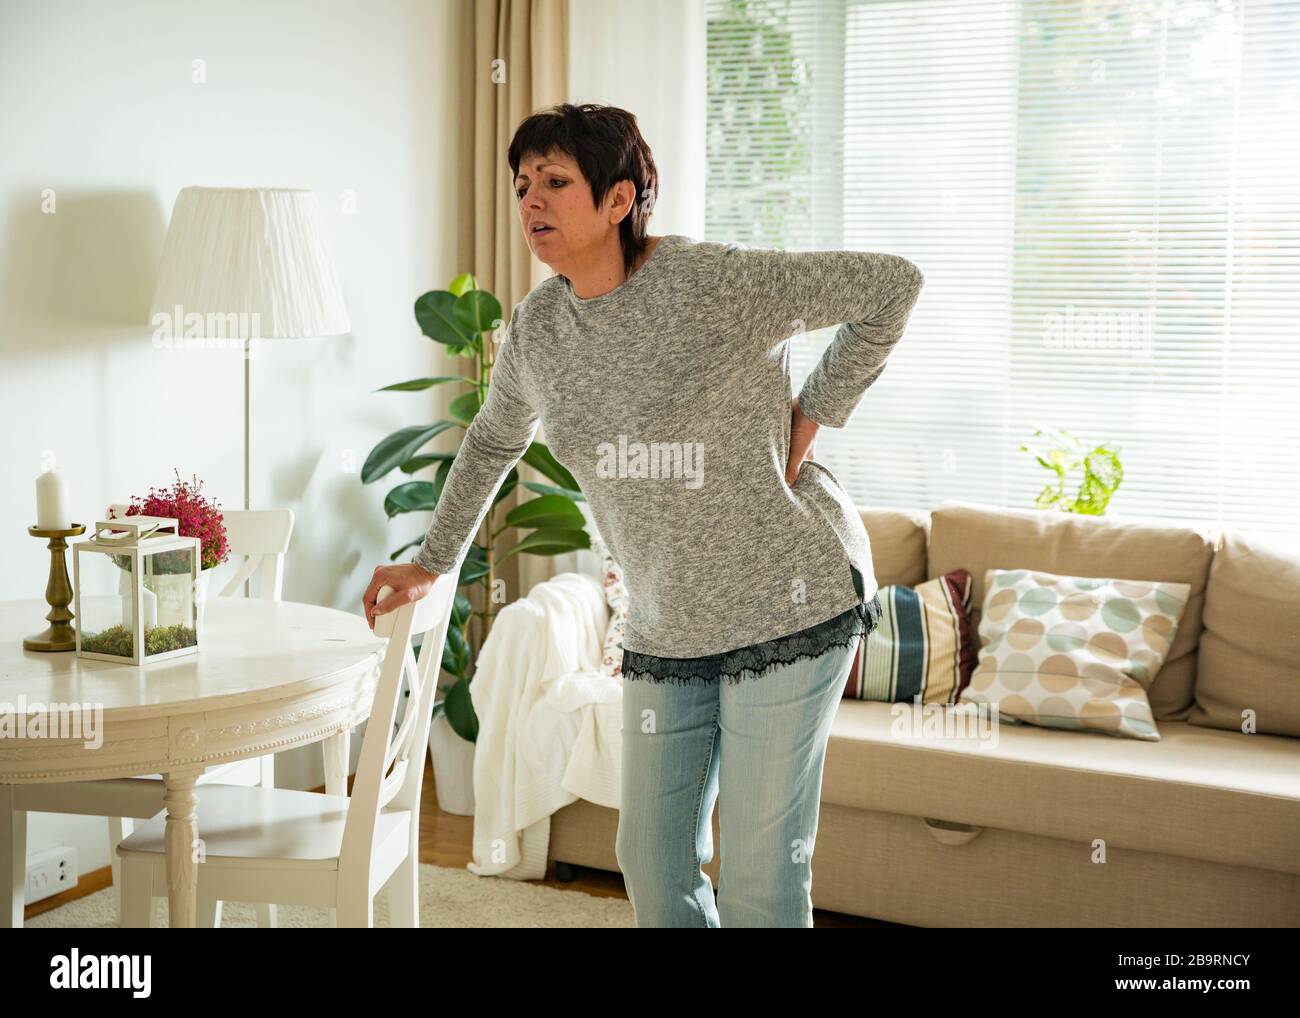 Mature woman suffering from backache at home. Massaging lower back with hand, feeling exhausted, standing in living room. Stock Photo